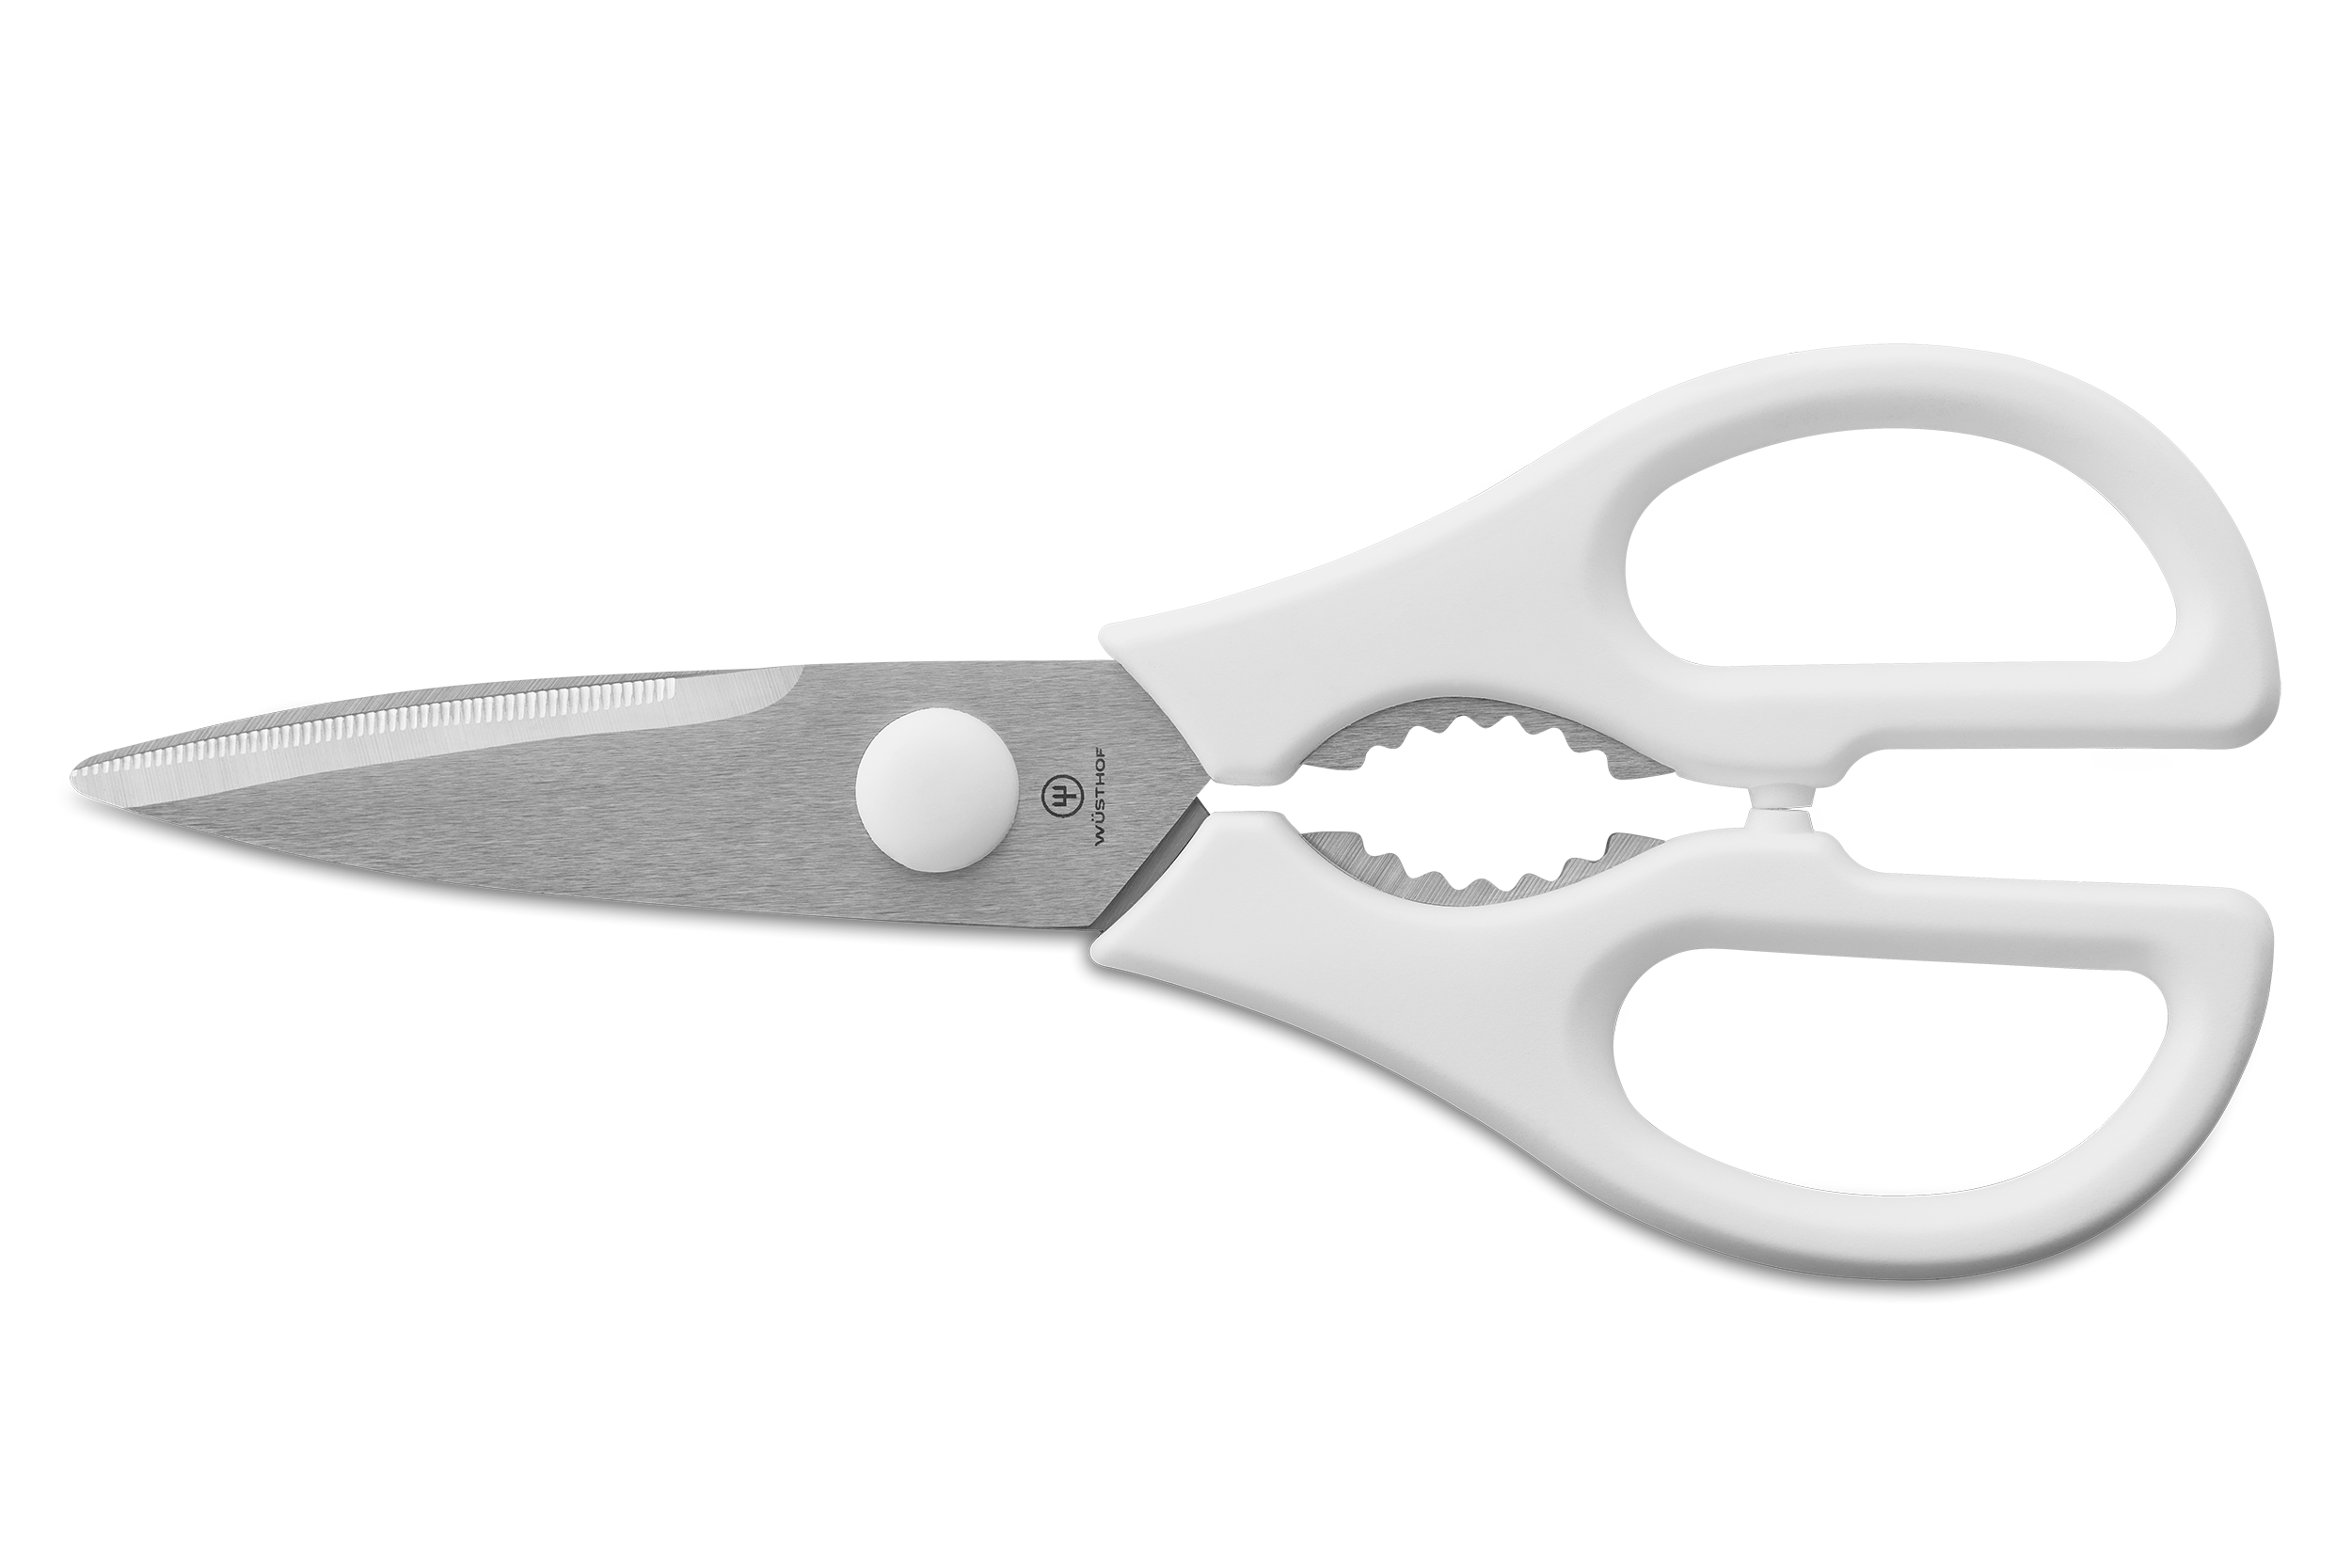 Wusthof Come Apart Kitchen Shears Scissor Unboxing & Review 